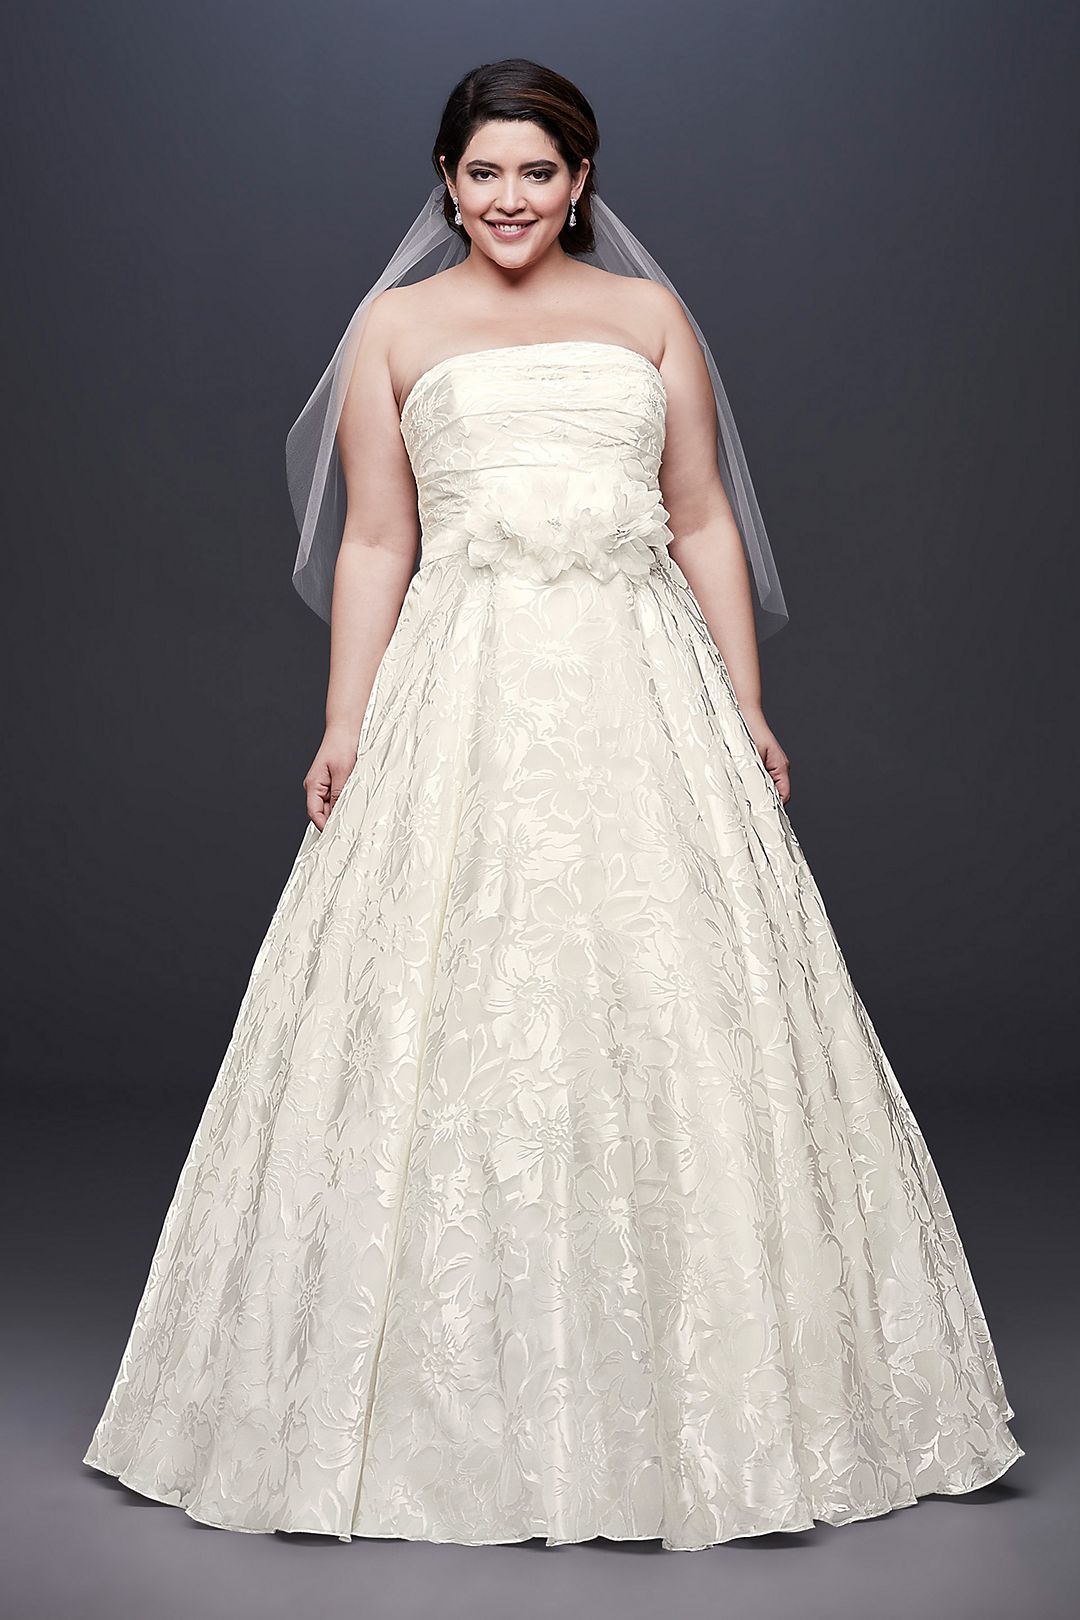 As-Is Printed A-line Plus Size Wedding Dress Image 4